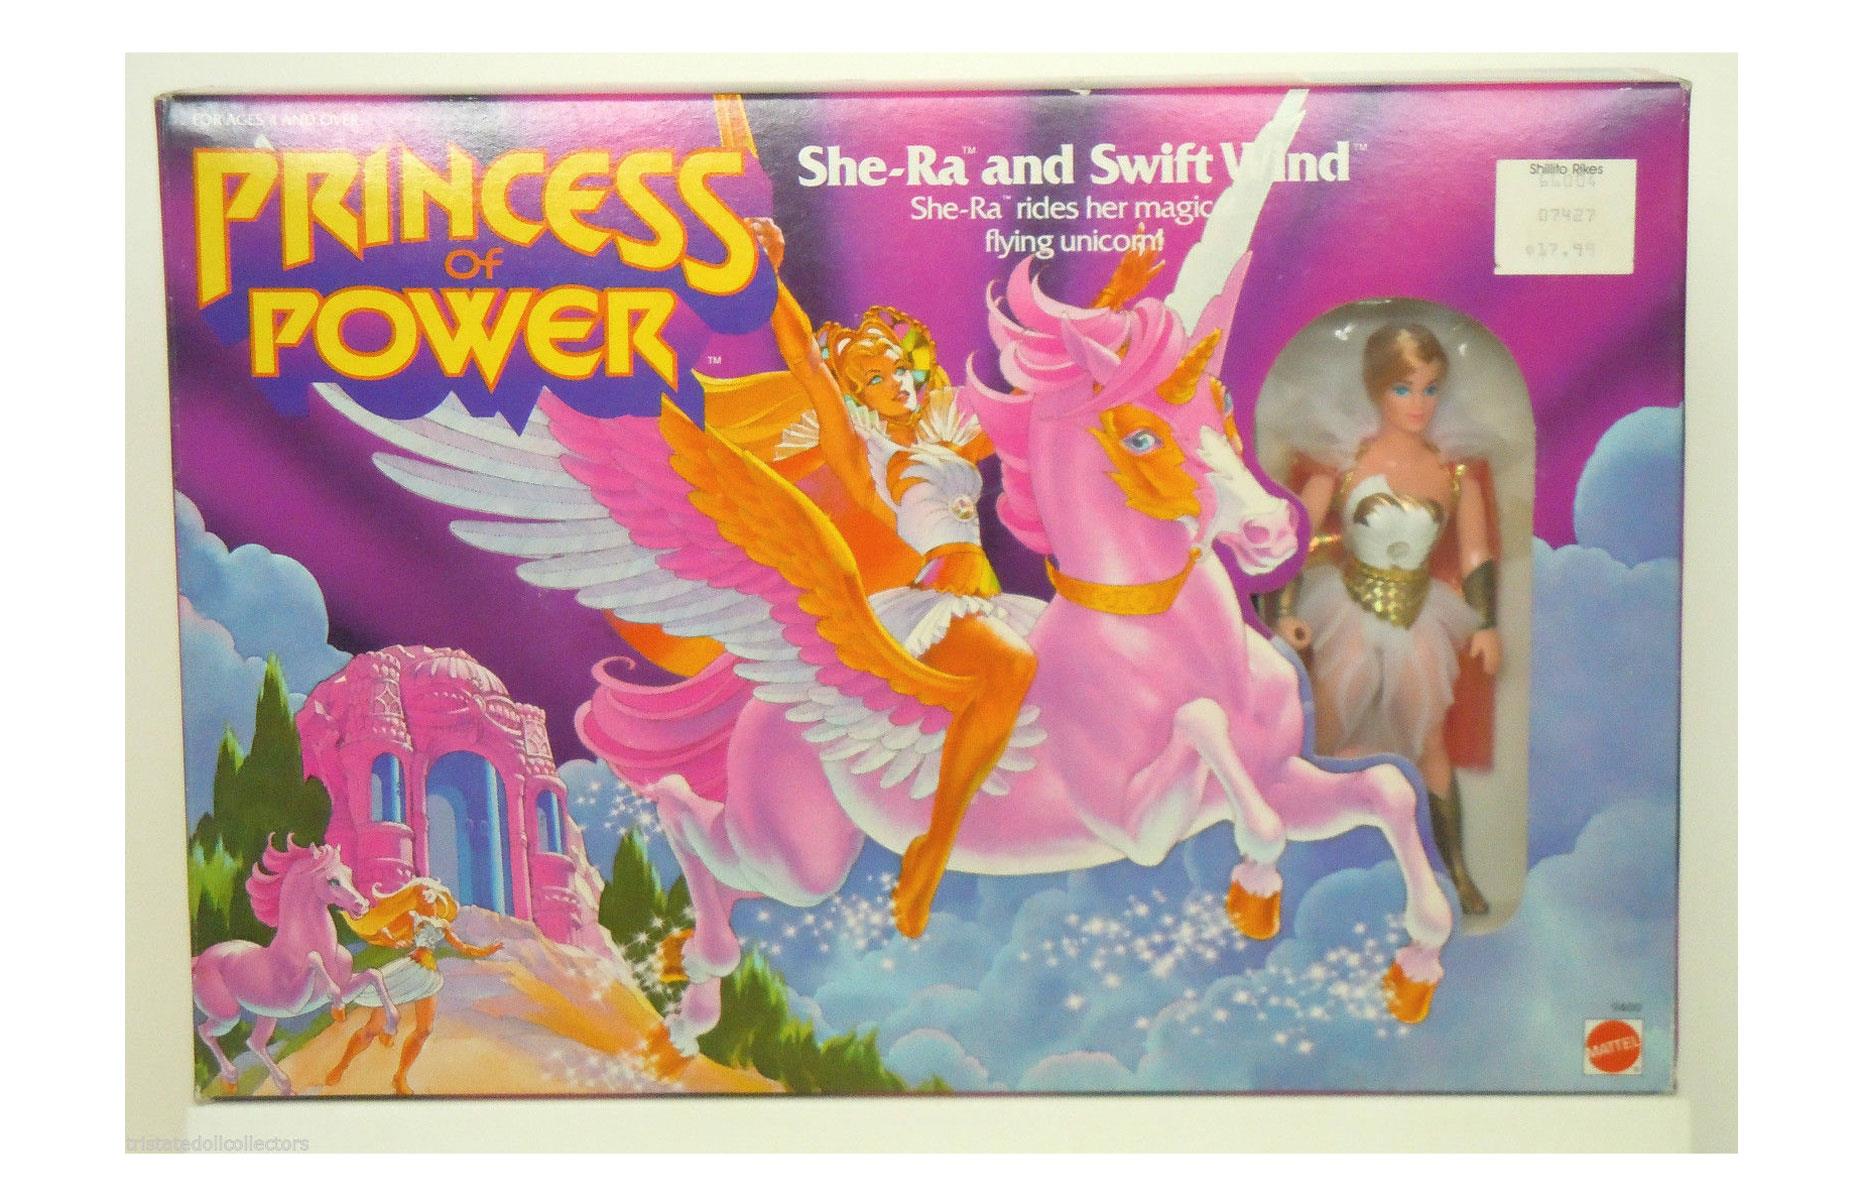 1984 –  He-Man She-Ra Princess of Power and Swift Wind: up to $4,000 (£2.9k)